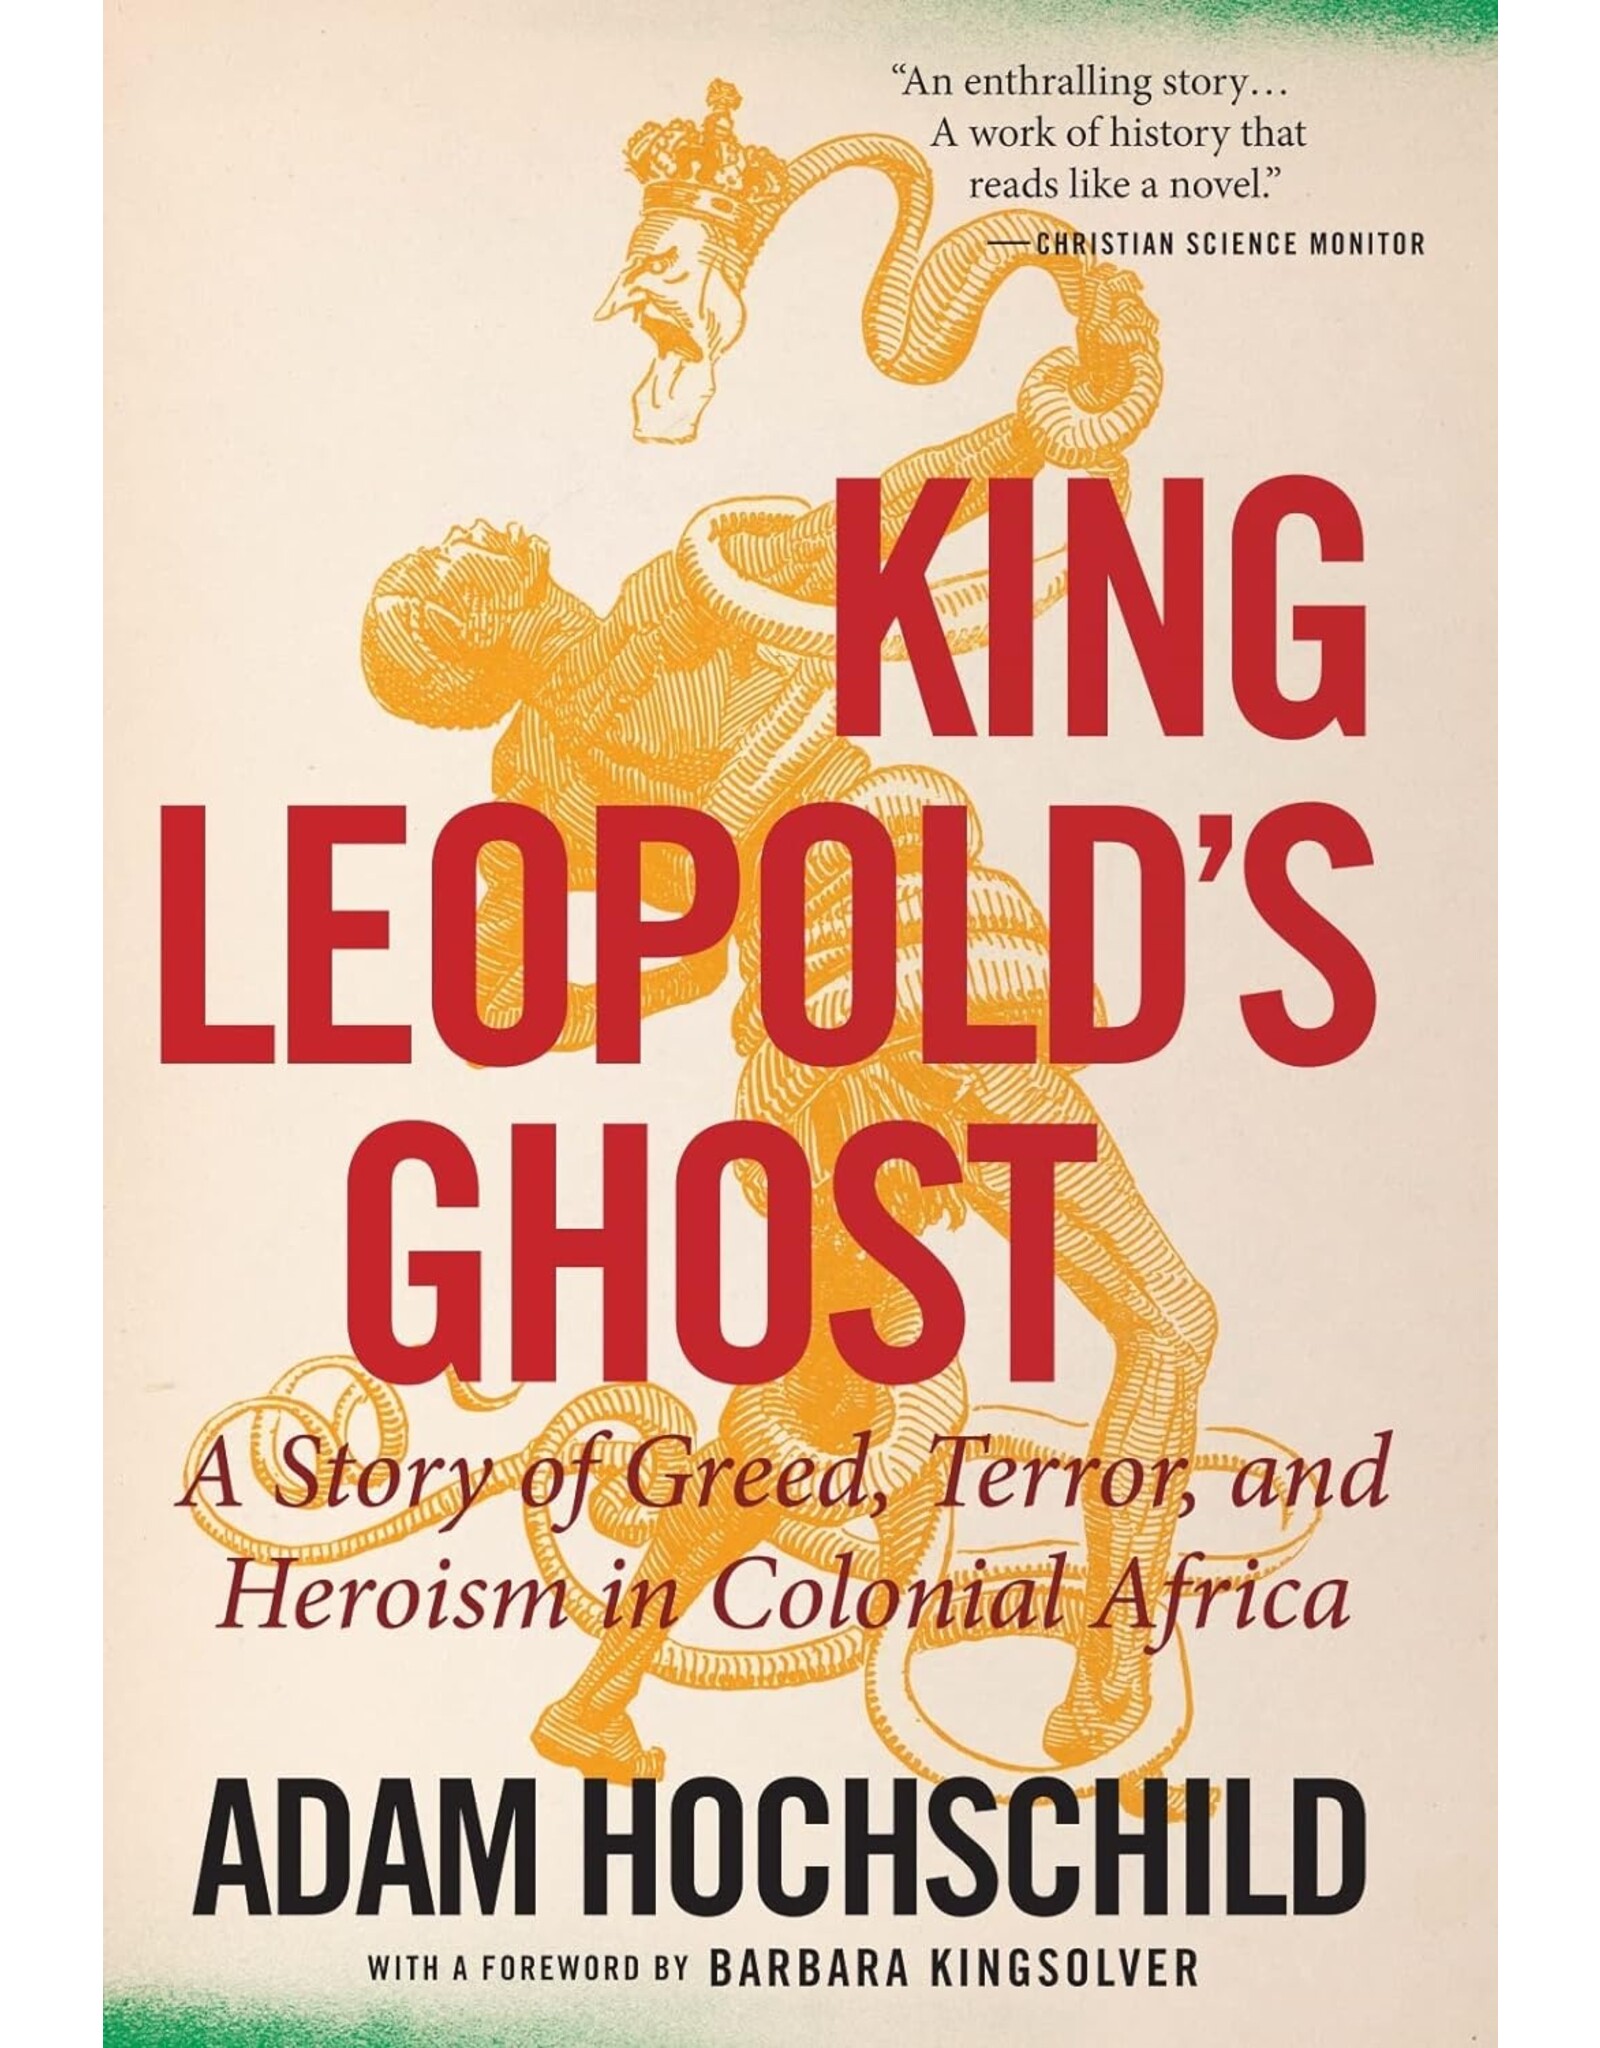 African History & Culture King Leopold's Ghost: A Story of Greed, Terror, and Heroism in Colonial Africa